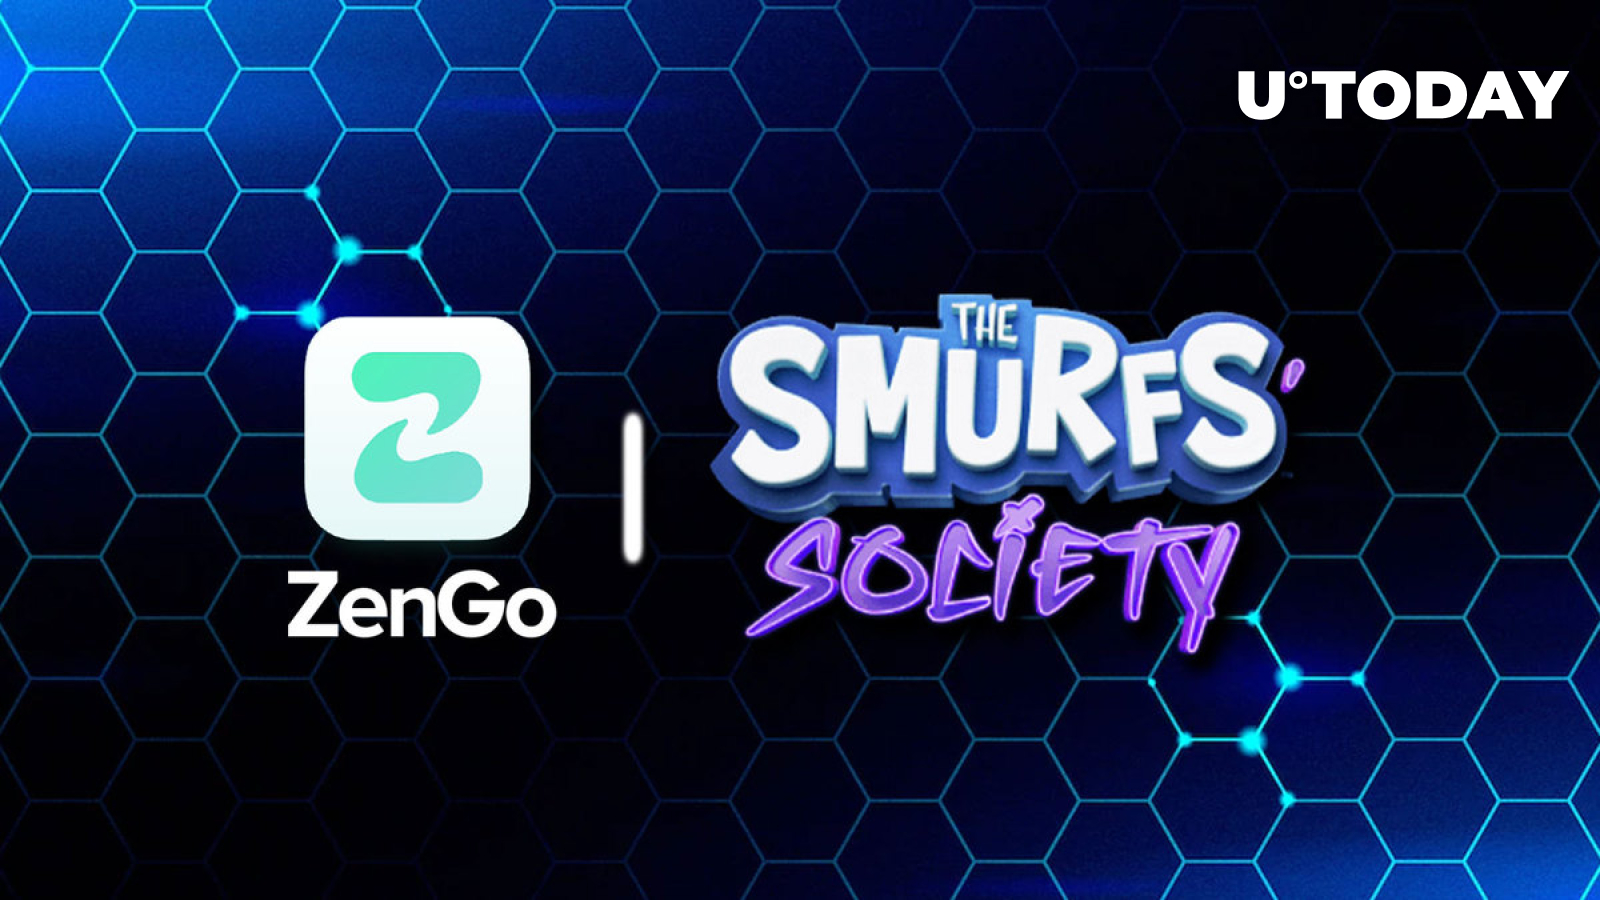 The Smurfs’ Society Comes to Web3 Segment with ZenGo Integration